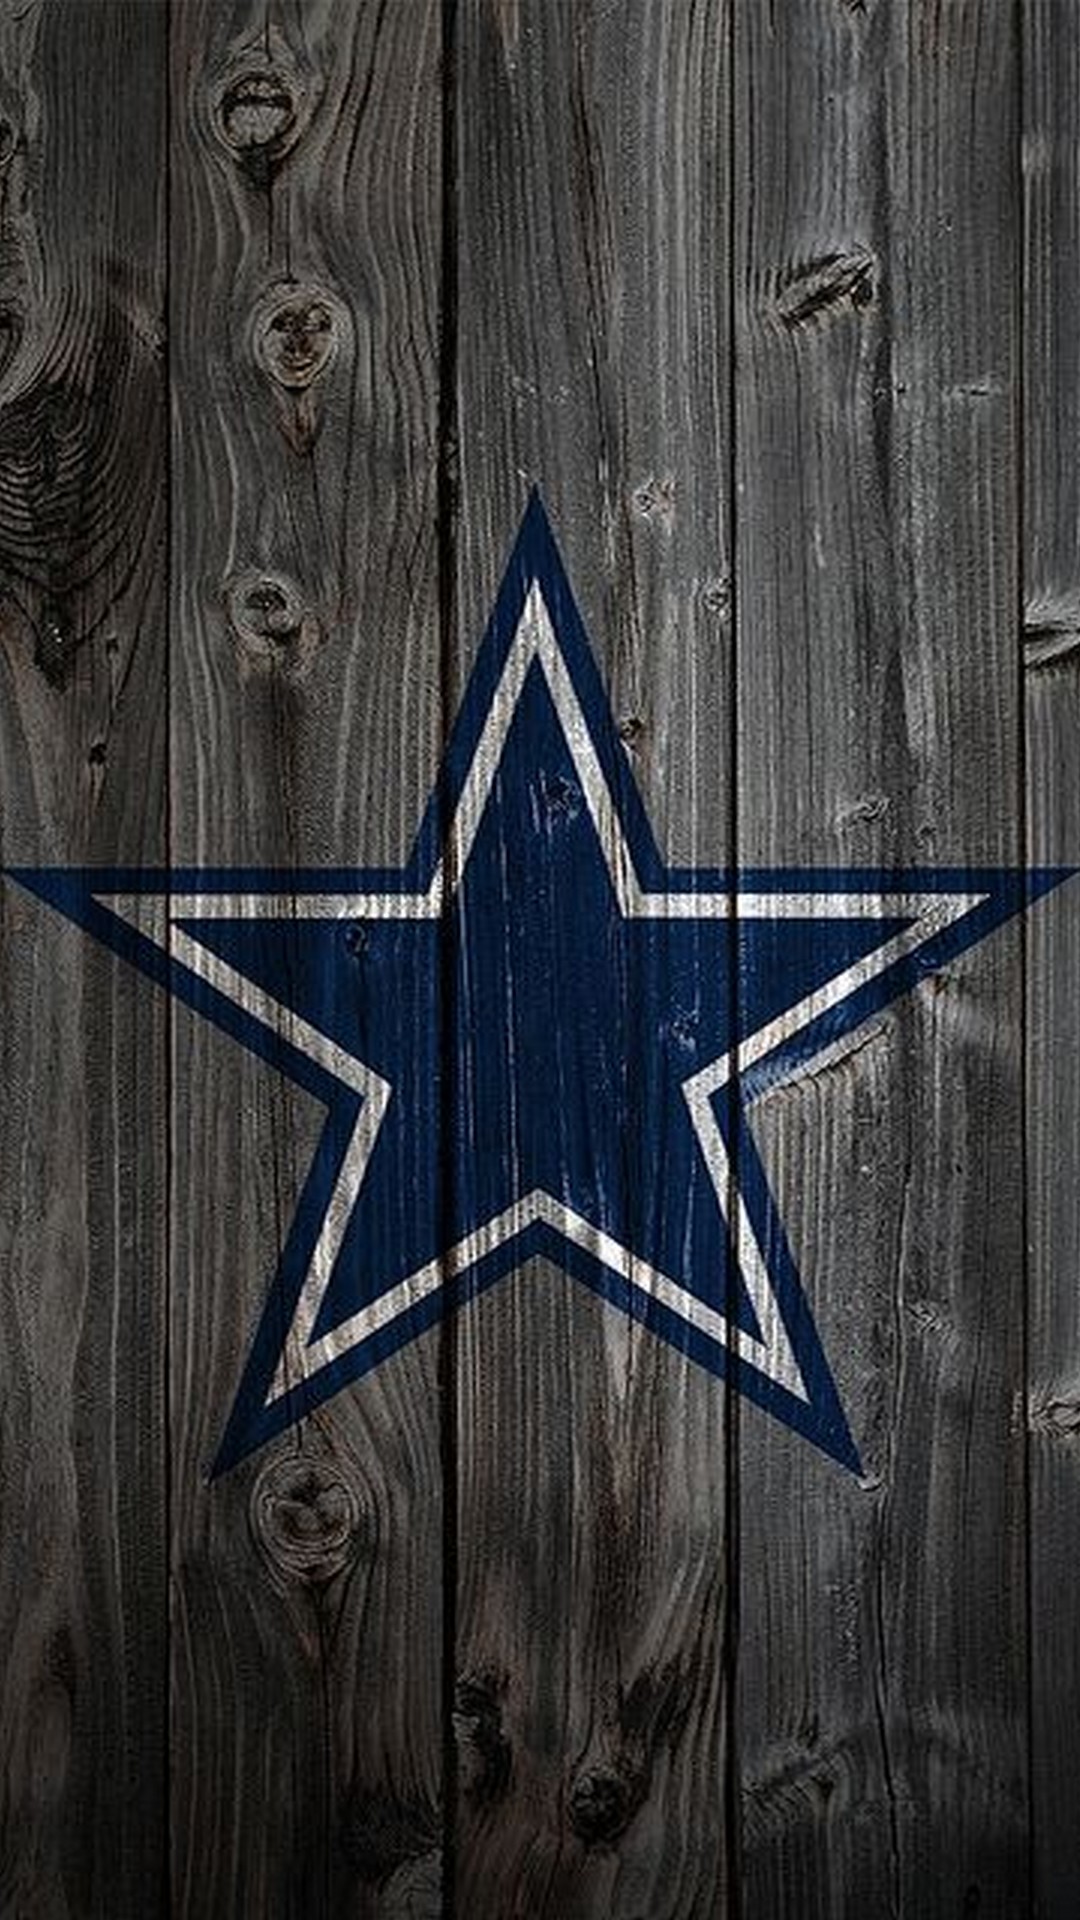 Dallas Cowboys iPhone Wallpaper HD With high-resolution 1080X1920 pixel. Download and set as wallpaper for Apple iPhone X, XS Max, XR, 8, 7, 6, SE, iPad, Android